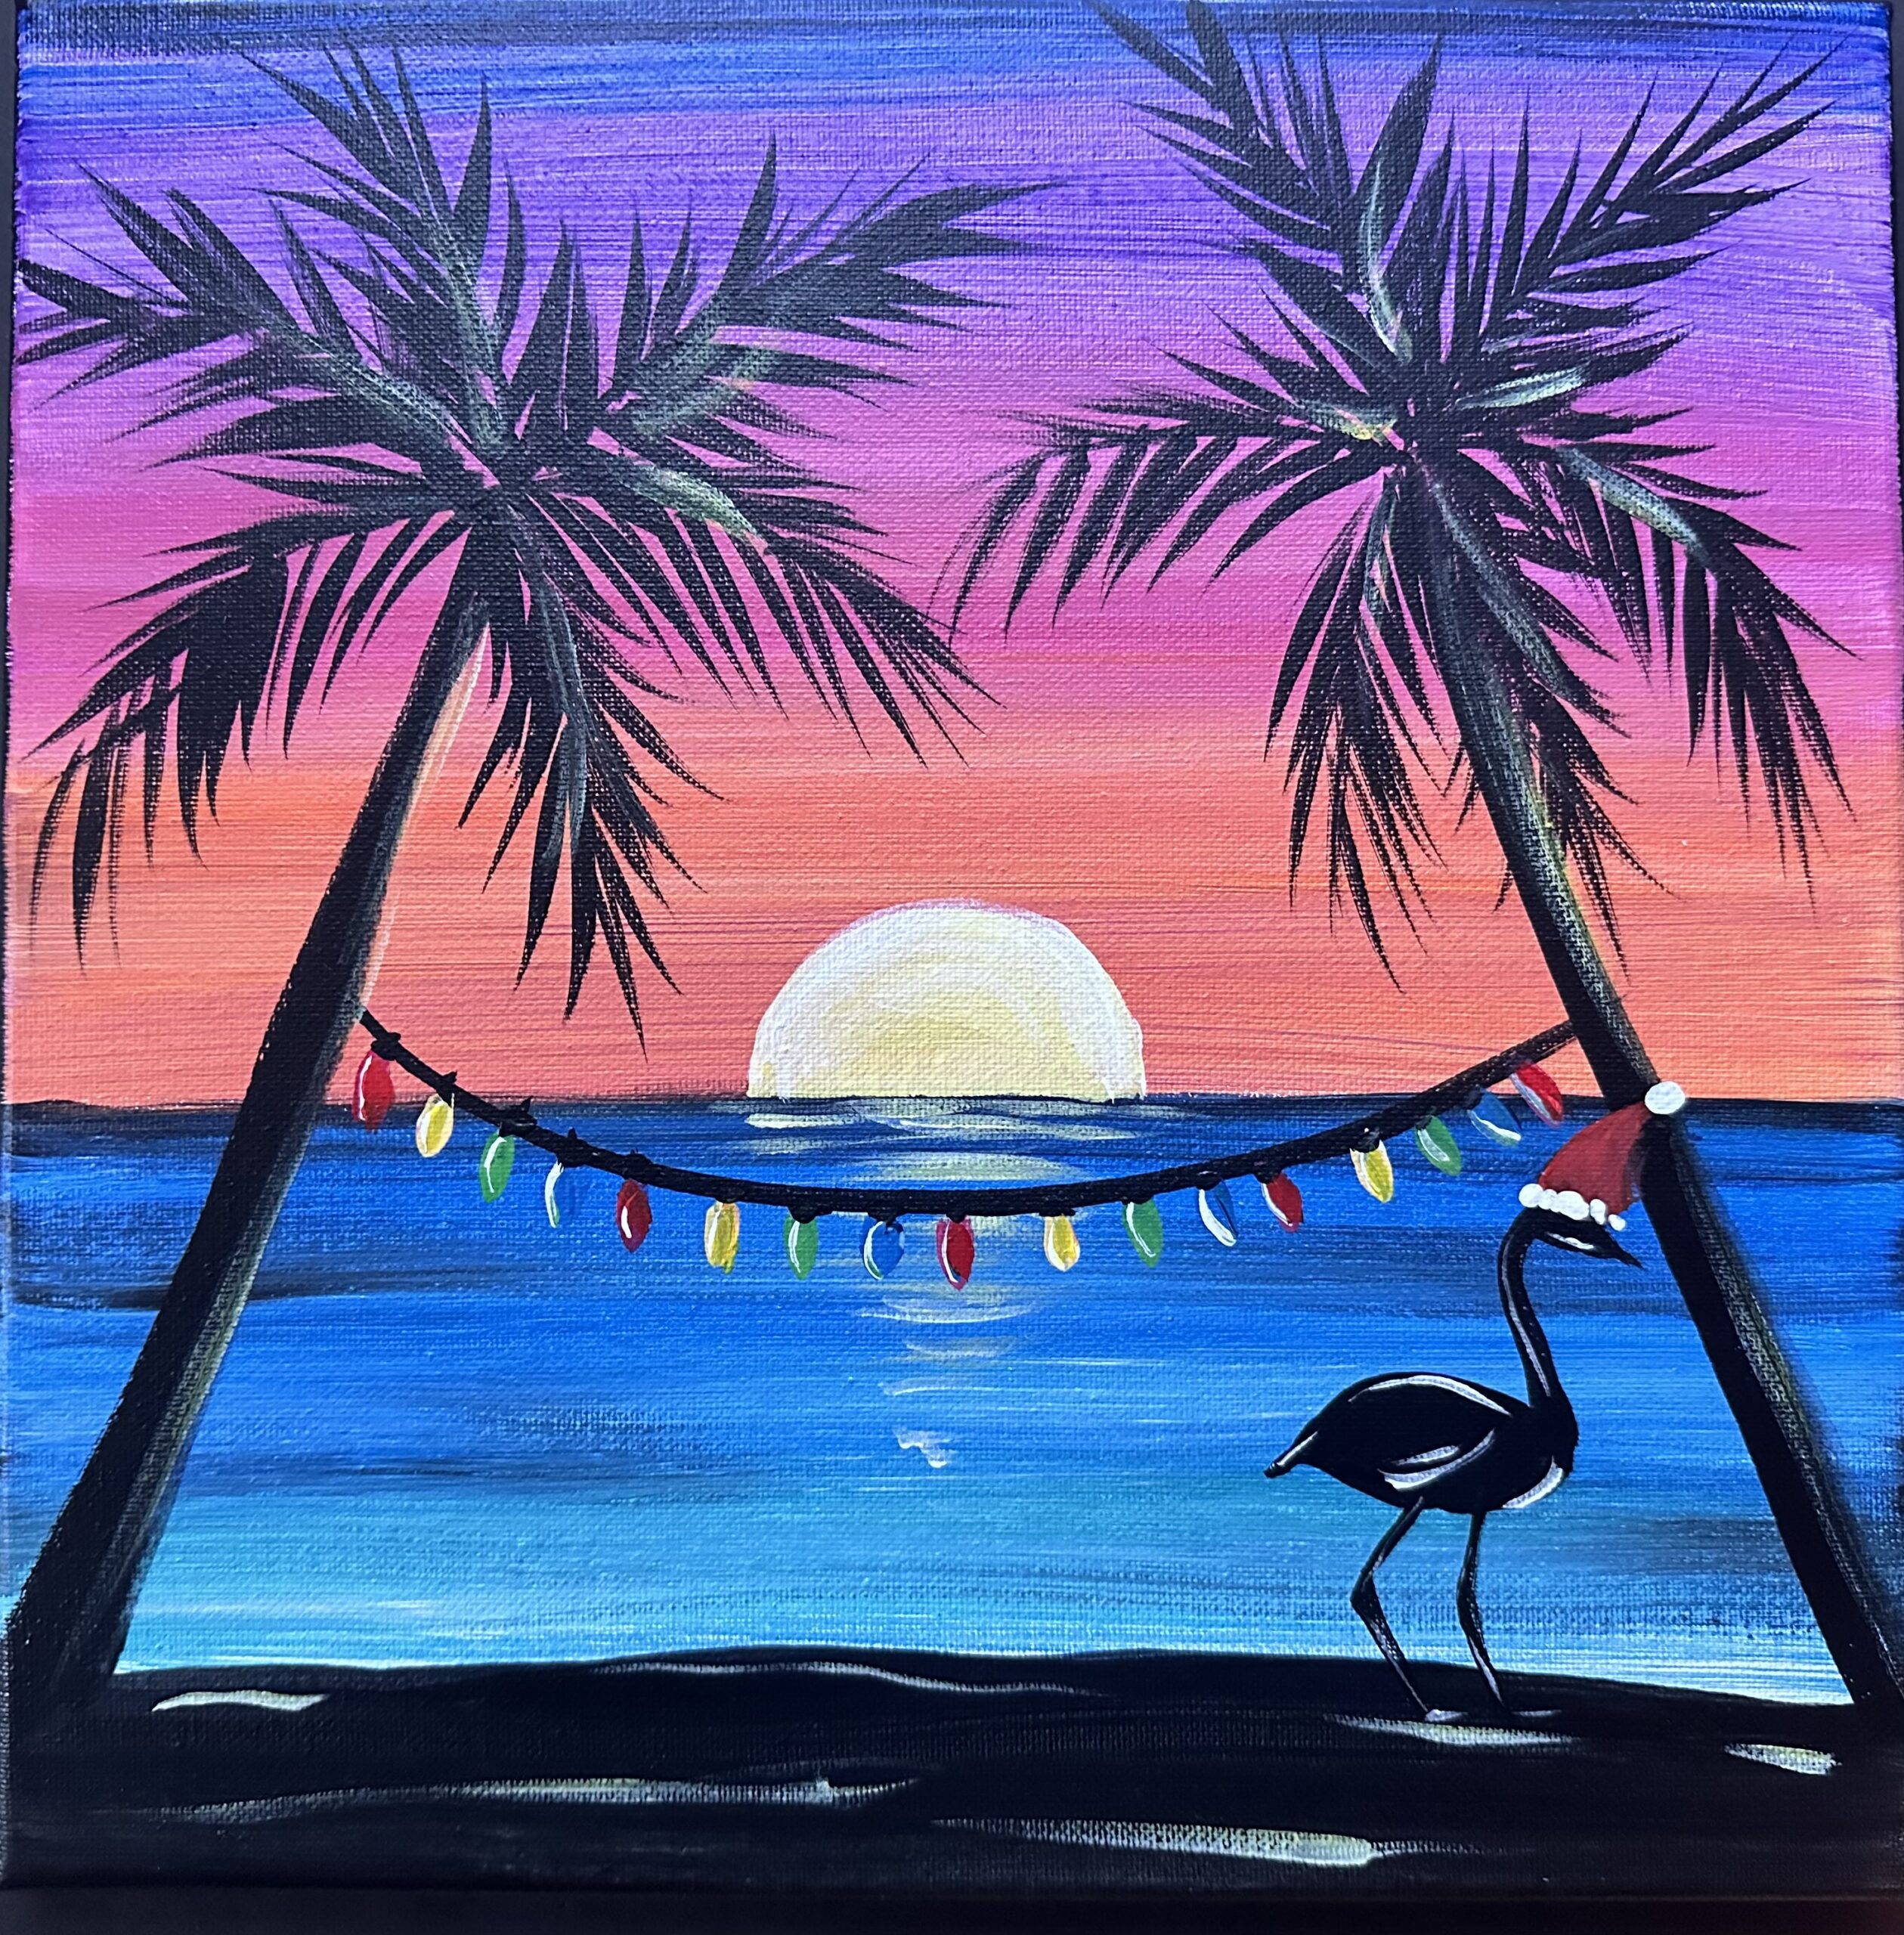 a painting of a flamingo and palm trees at sunset.